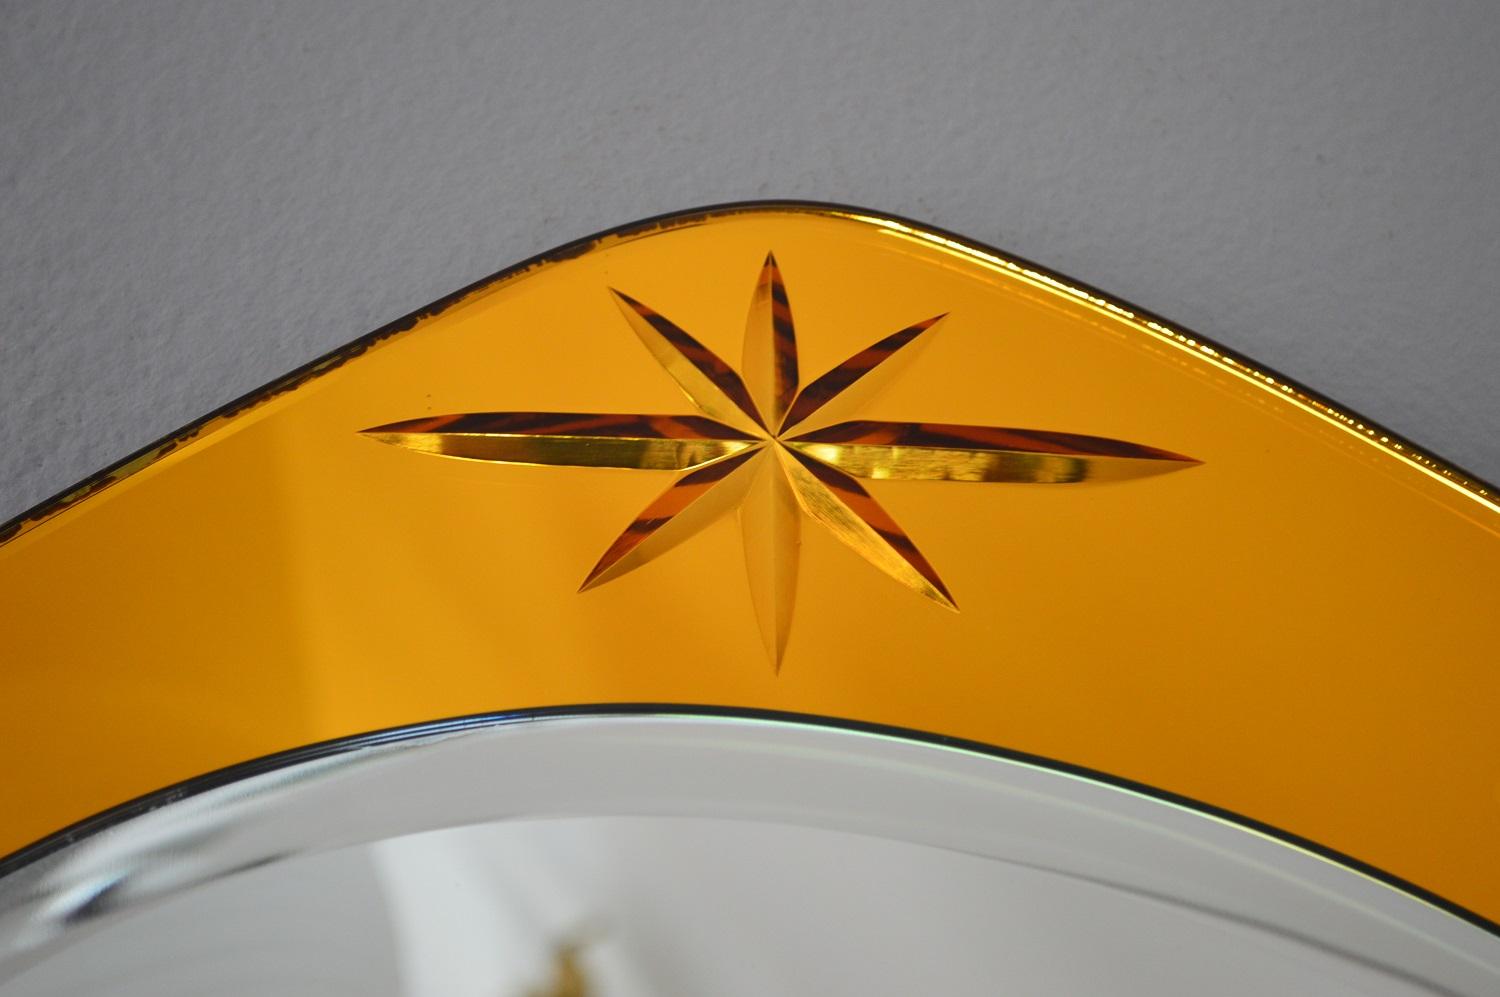 Mid-20th Century Italian Midcentury Crystal Glass Wall Mirror in Golden Yellow Color, 1960s